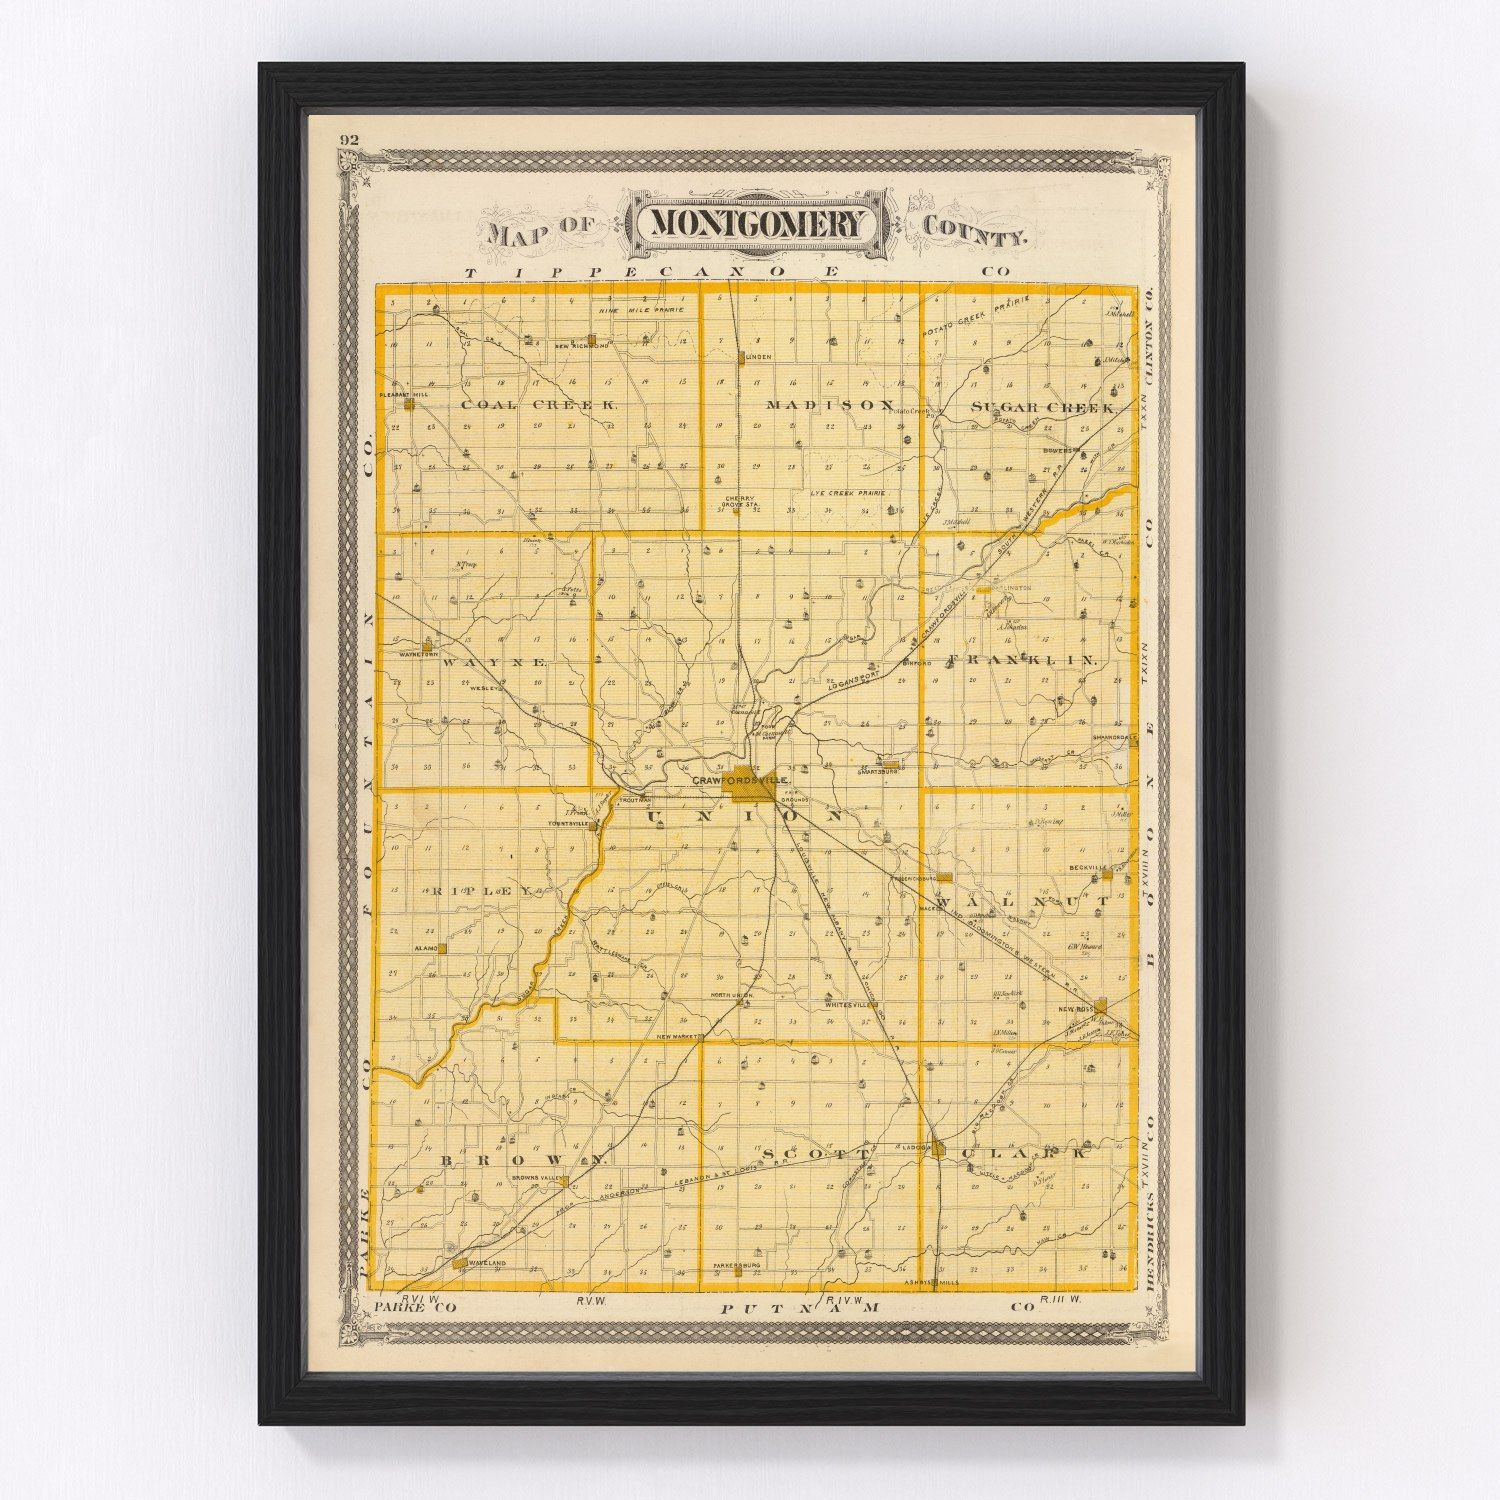 Vintage Map Of Montgomery County Indiana 1876 By Teds Vintage Art